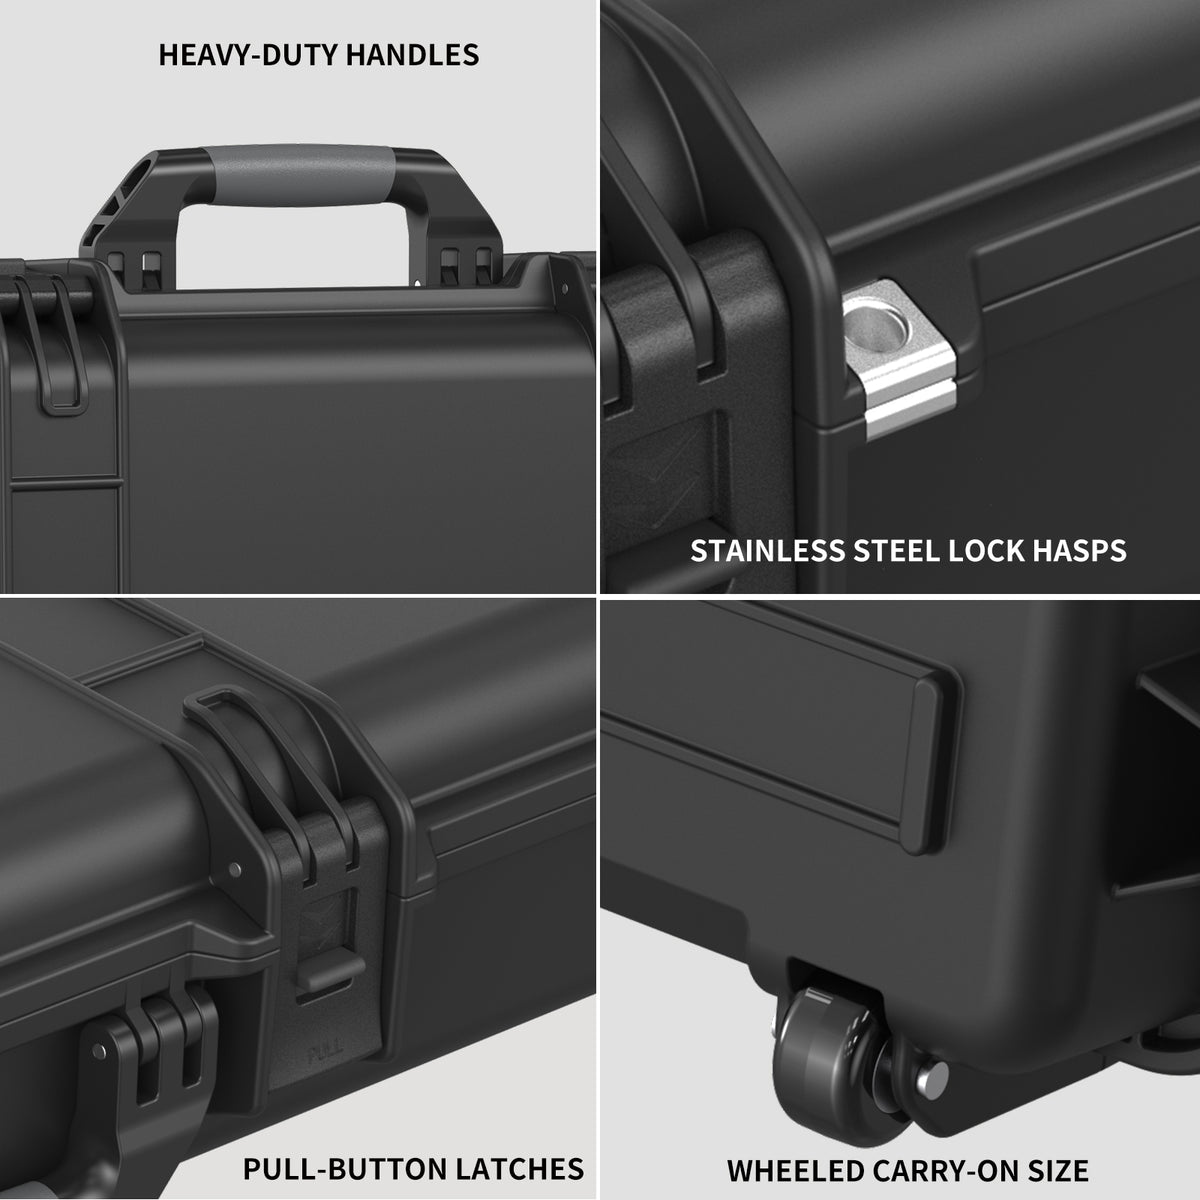 RPNB PP-11140 Weatherproof Hard Rifle Case with Customizable Foam Insert Features